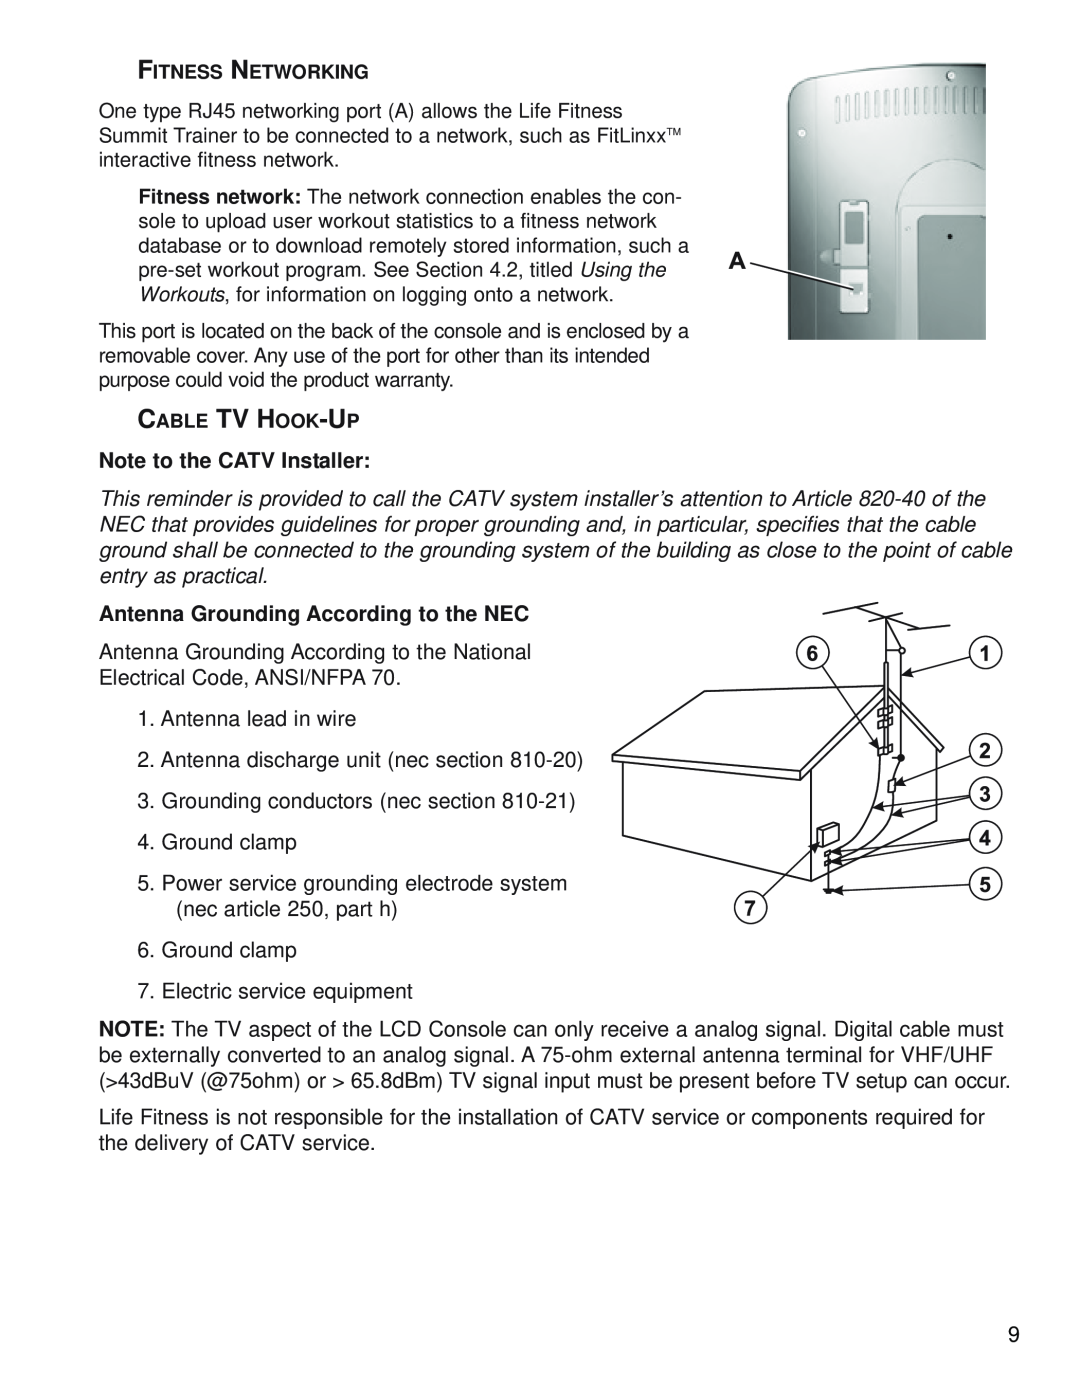 Life Fitness 95Le operation manual Note to the CATV Installer, Antenna Grounding According to the NEC 